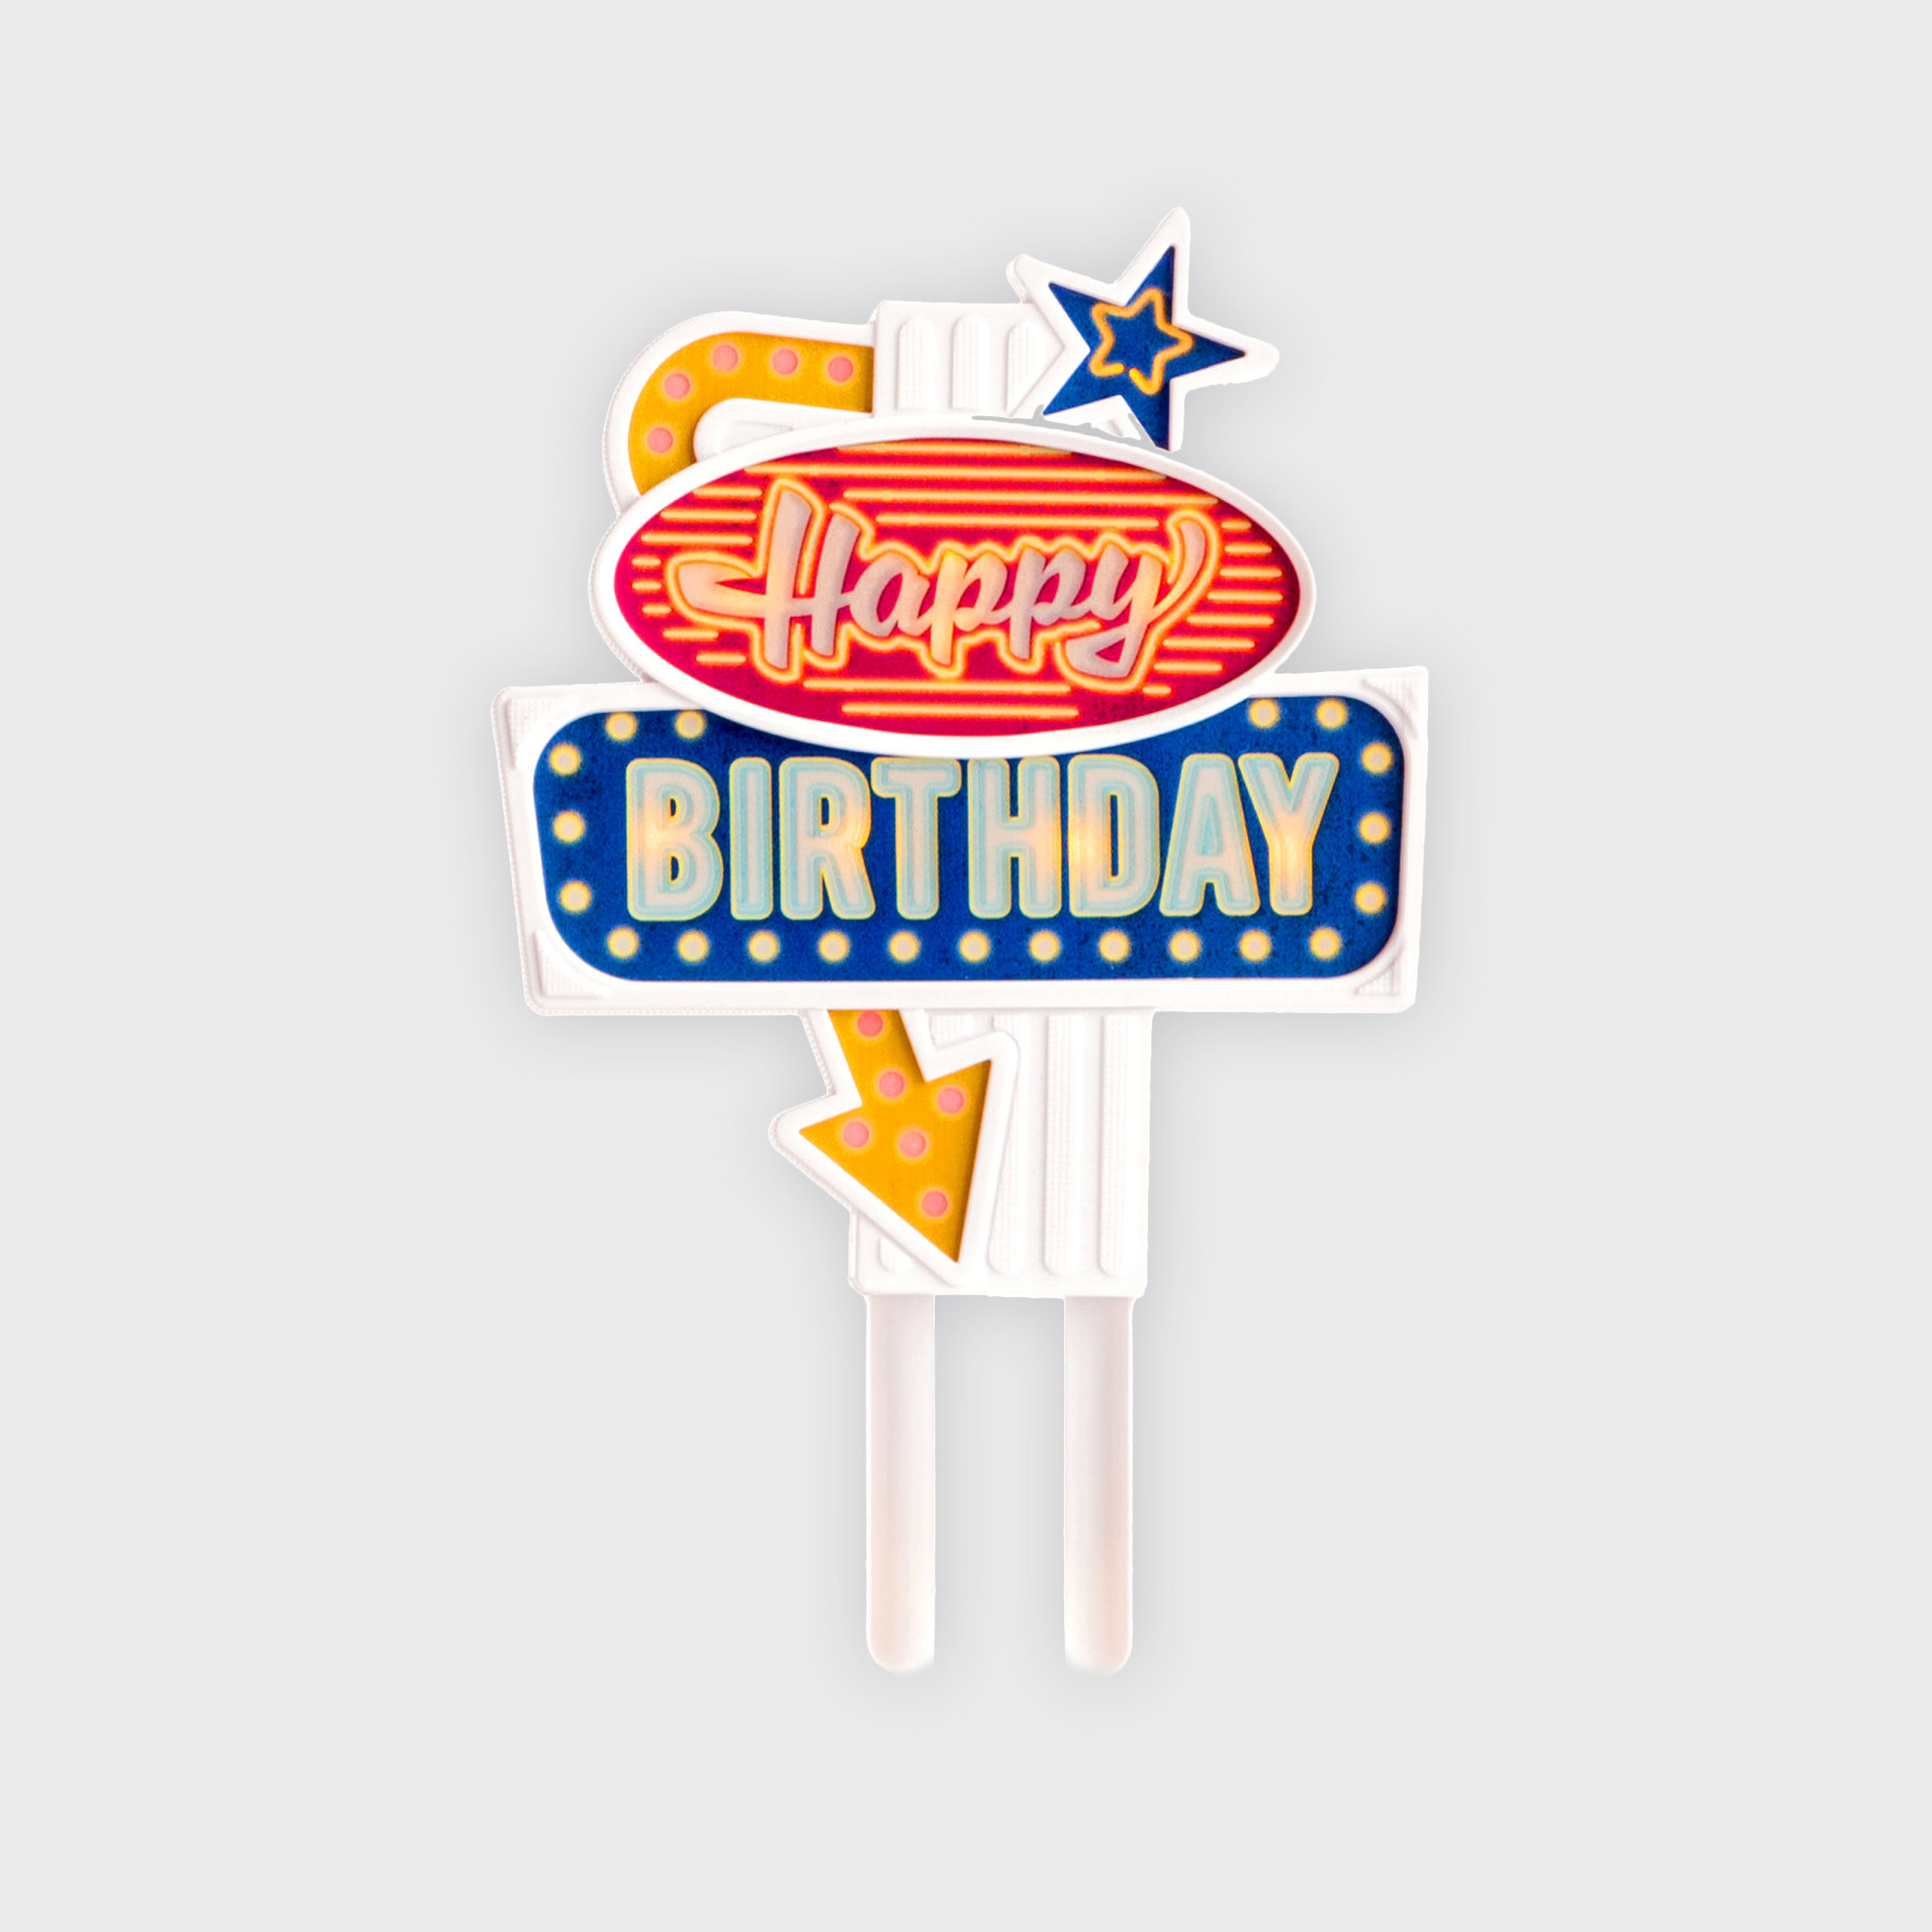 show original title flashing birthday patches Details about   Suck uk retro decoration for cakes compleanno 